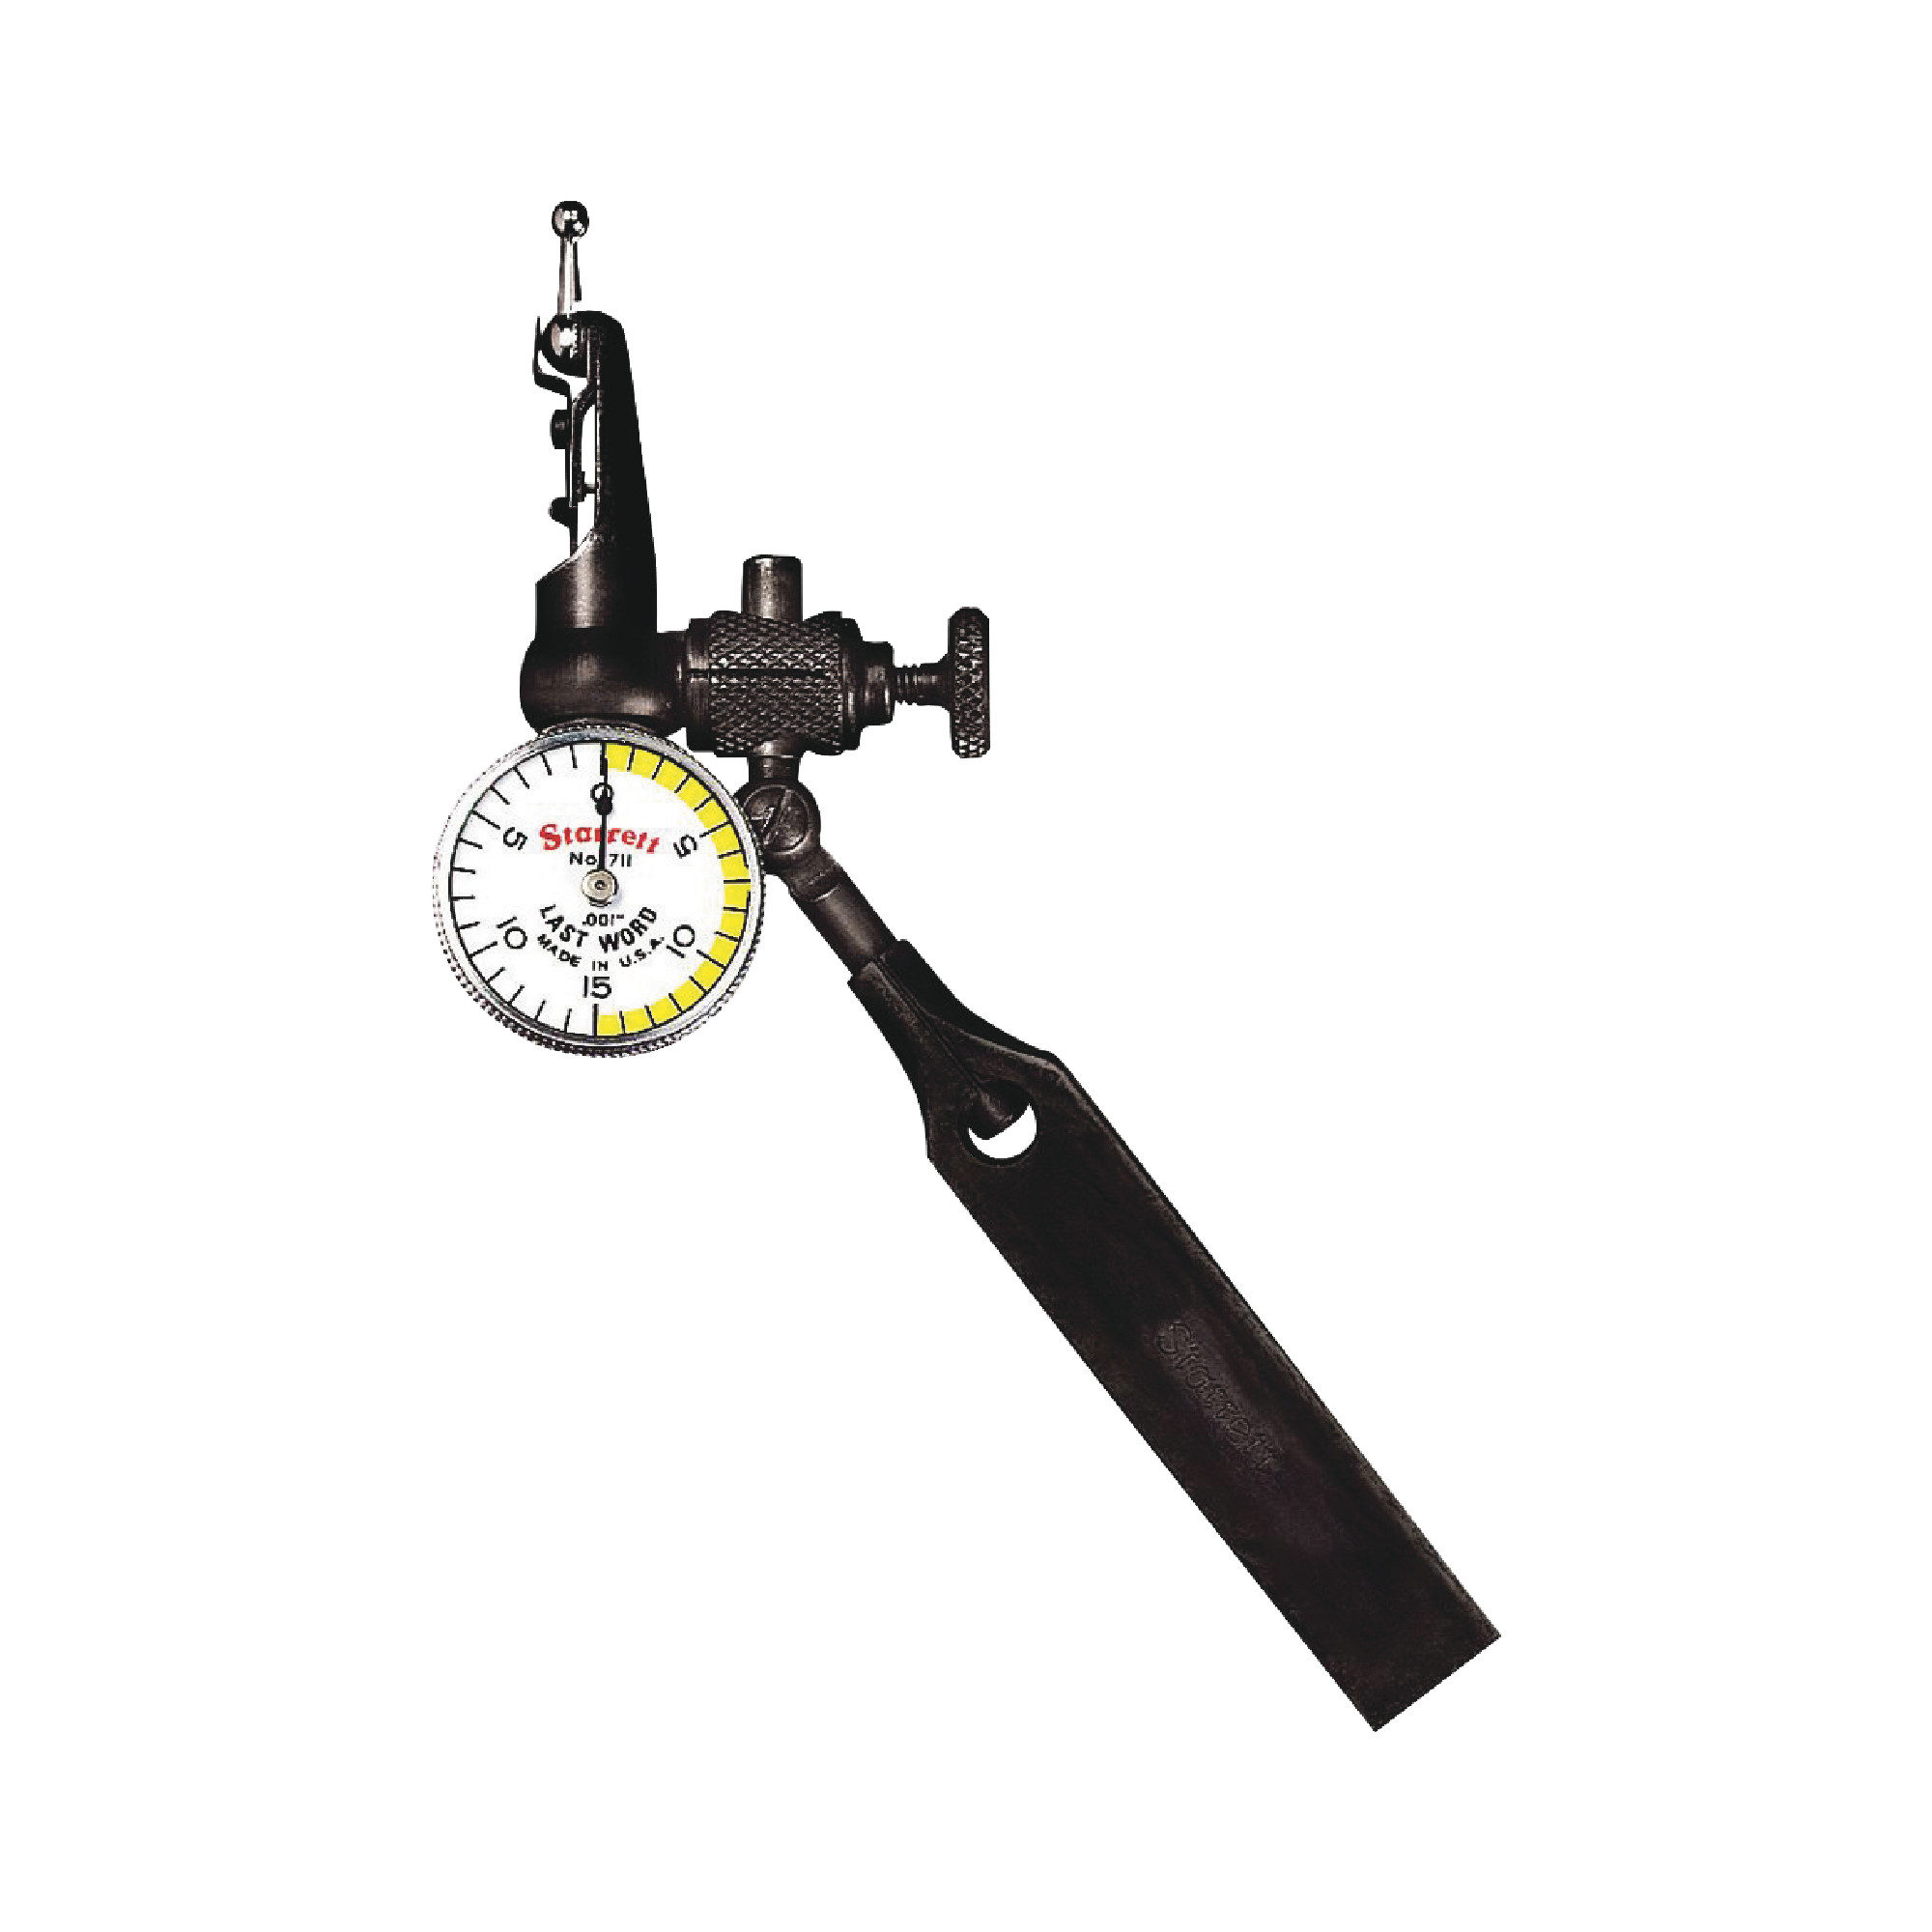 Last Word Dial Test Indicator With Universal Shank, Body Clamp & Long/Short Arm